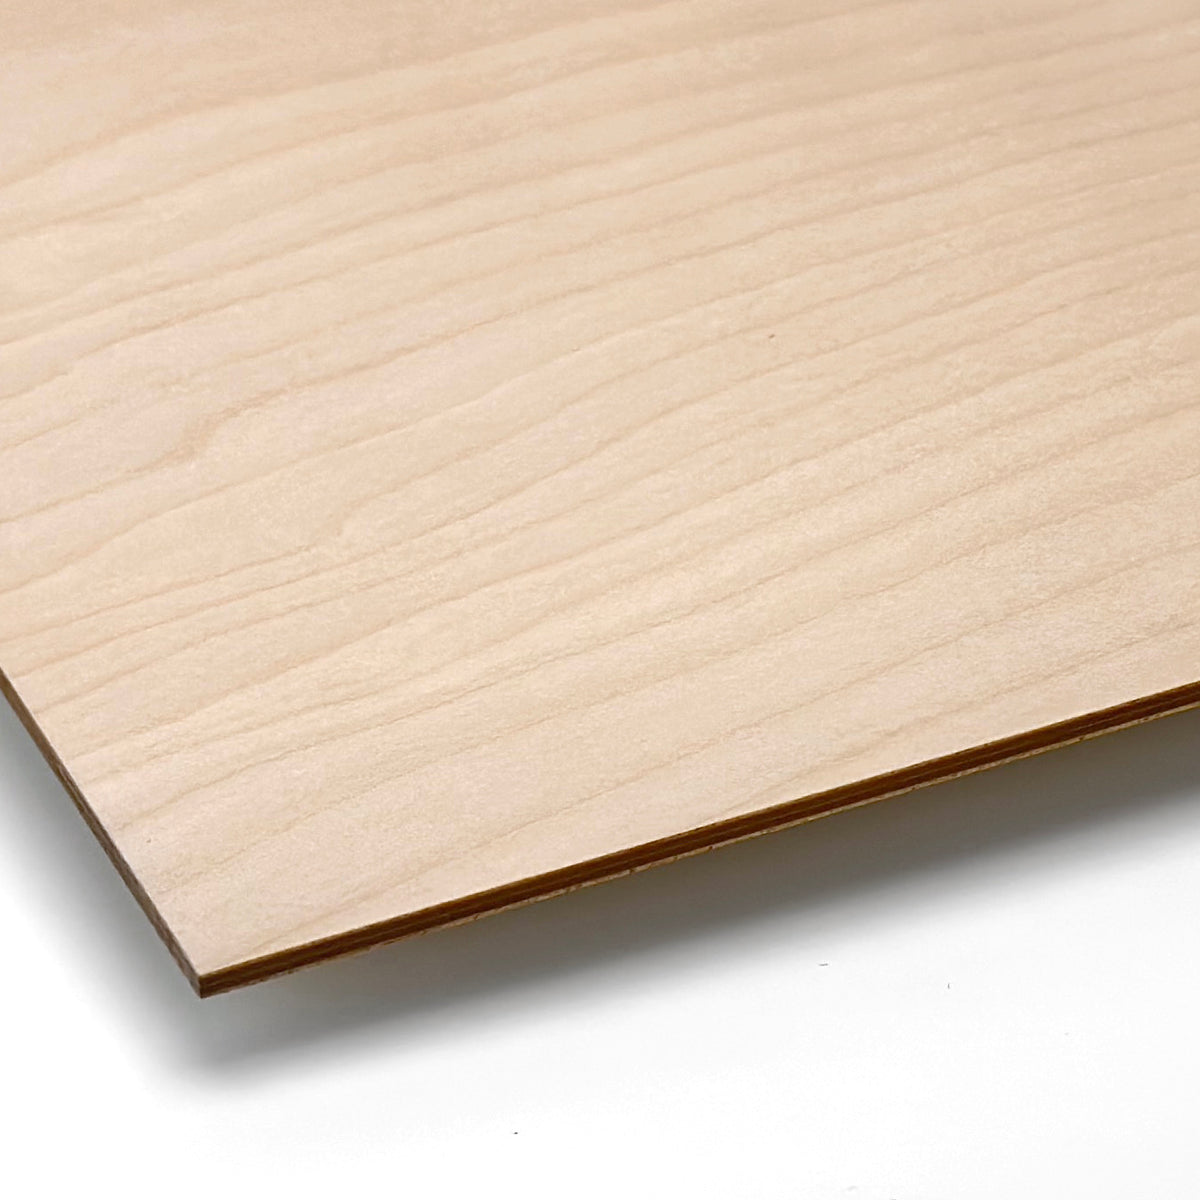 3mm Birch Plywood with laser cutting & Single sided colour printing - 720x470mm